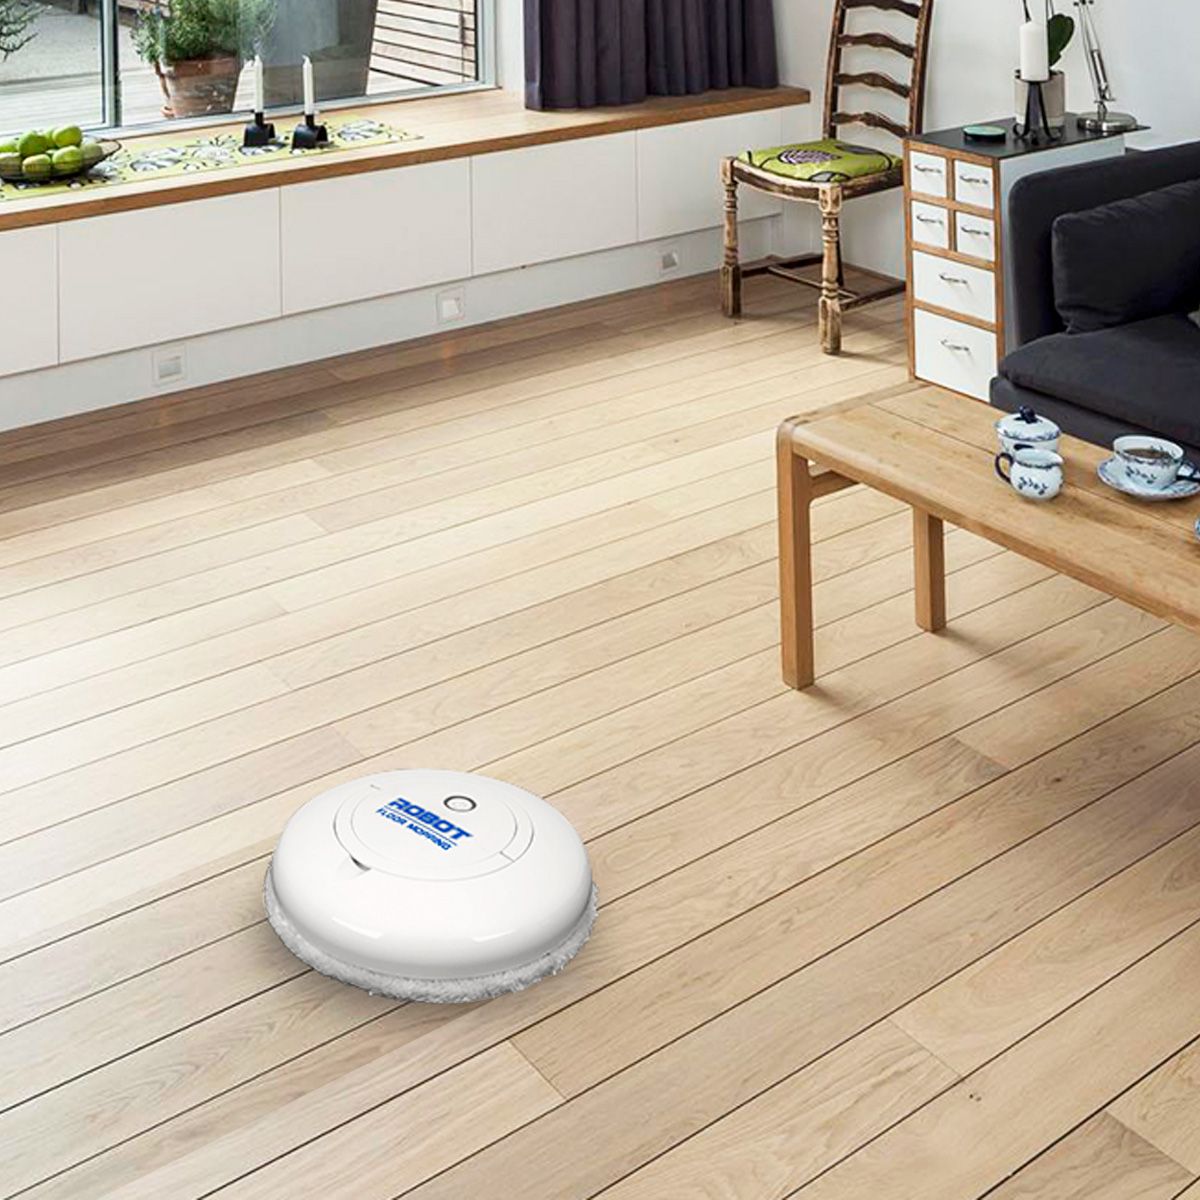 Automatic-Robot-Intelligent-Vacuum-Cleaner-Quiet-Floor-Mopping-Robot-for-Carpet-Marble-1477043